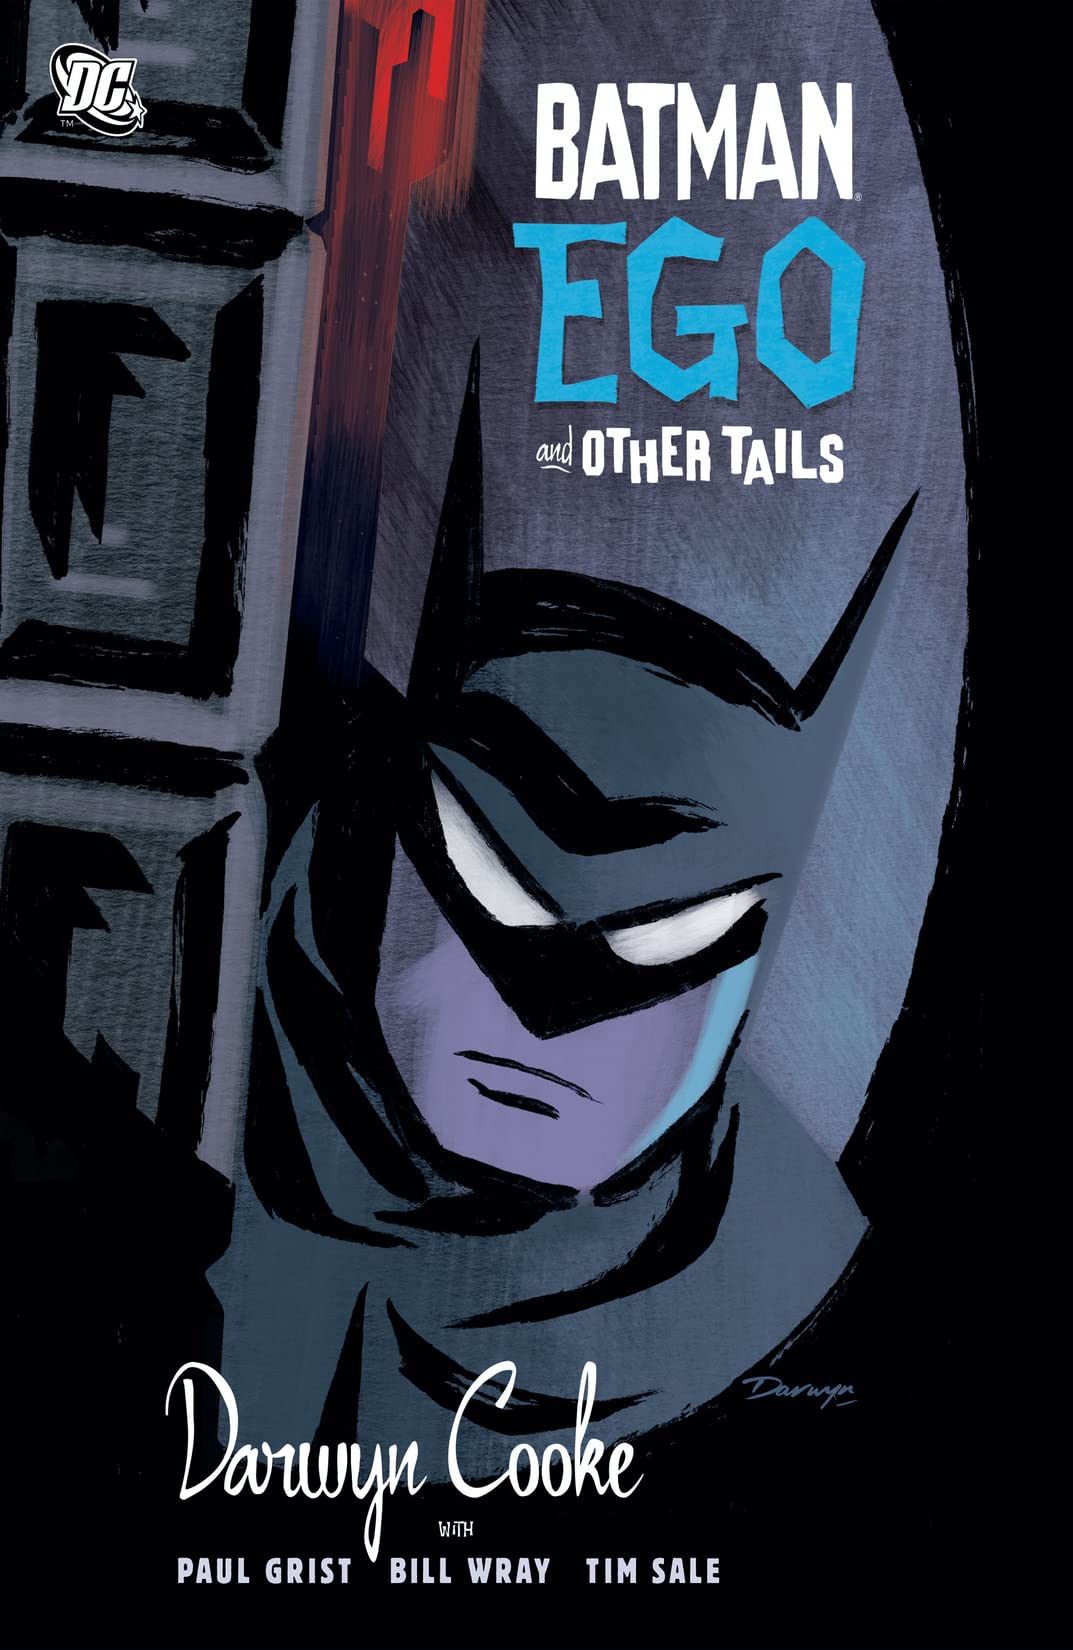 Comic Book - DC - Batman Ego and other Tales